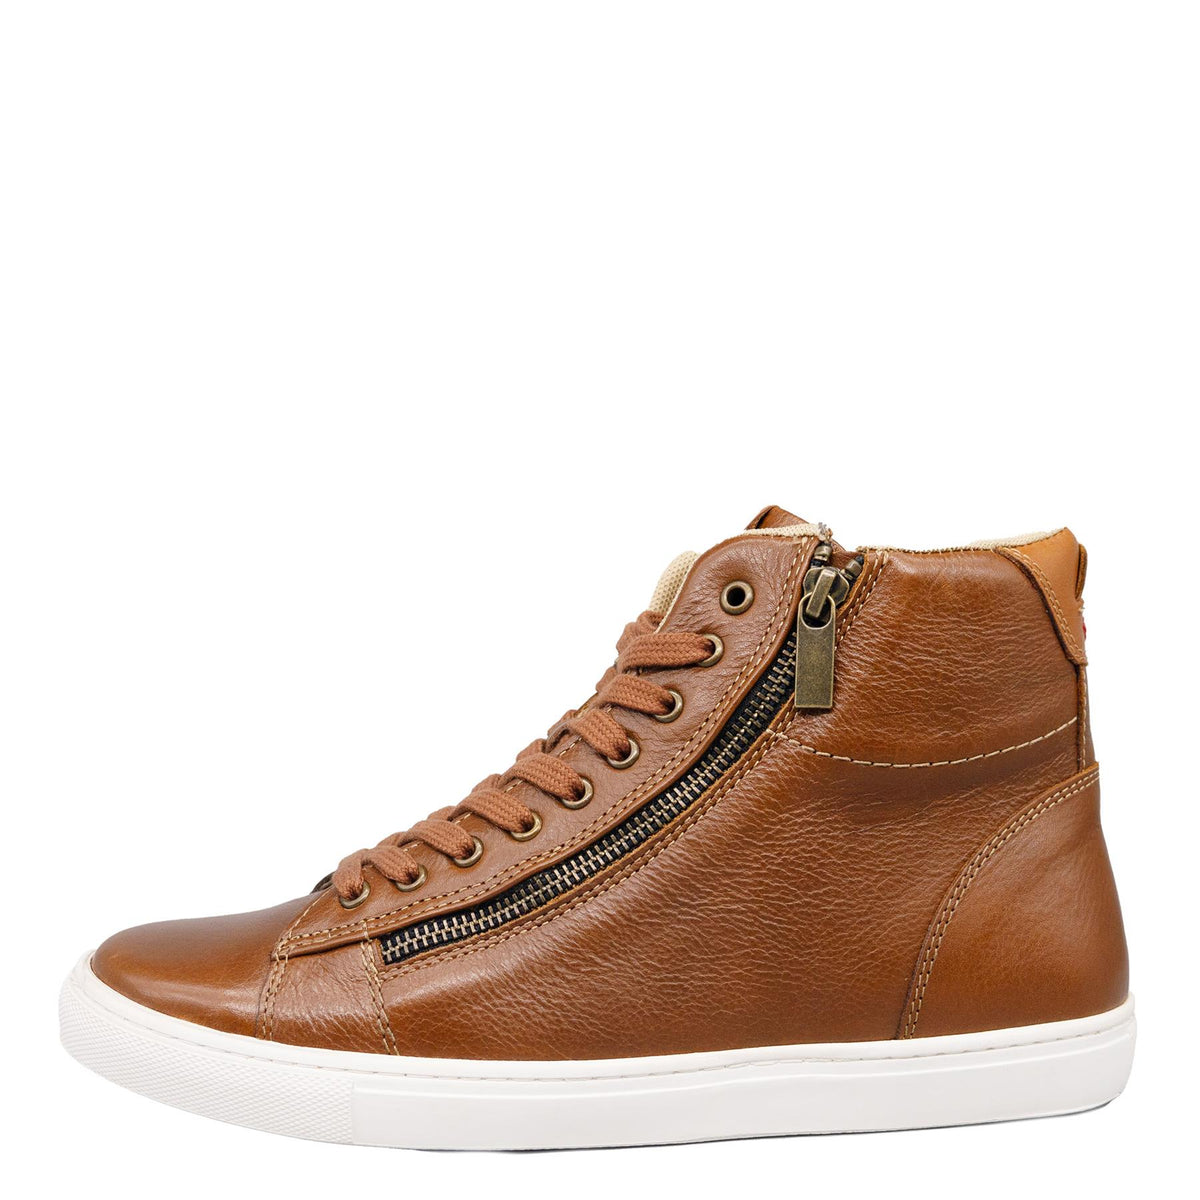 HX London Ilford High Top Leather Trainers